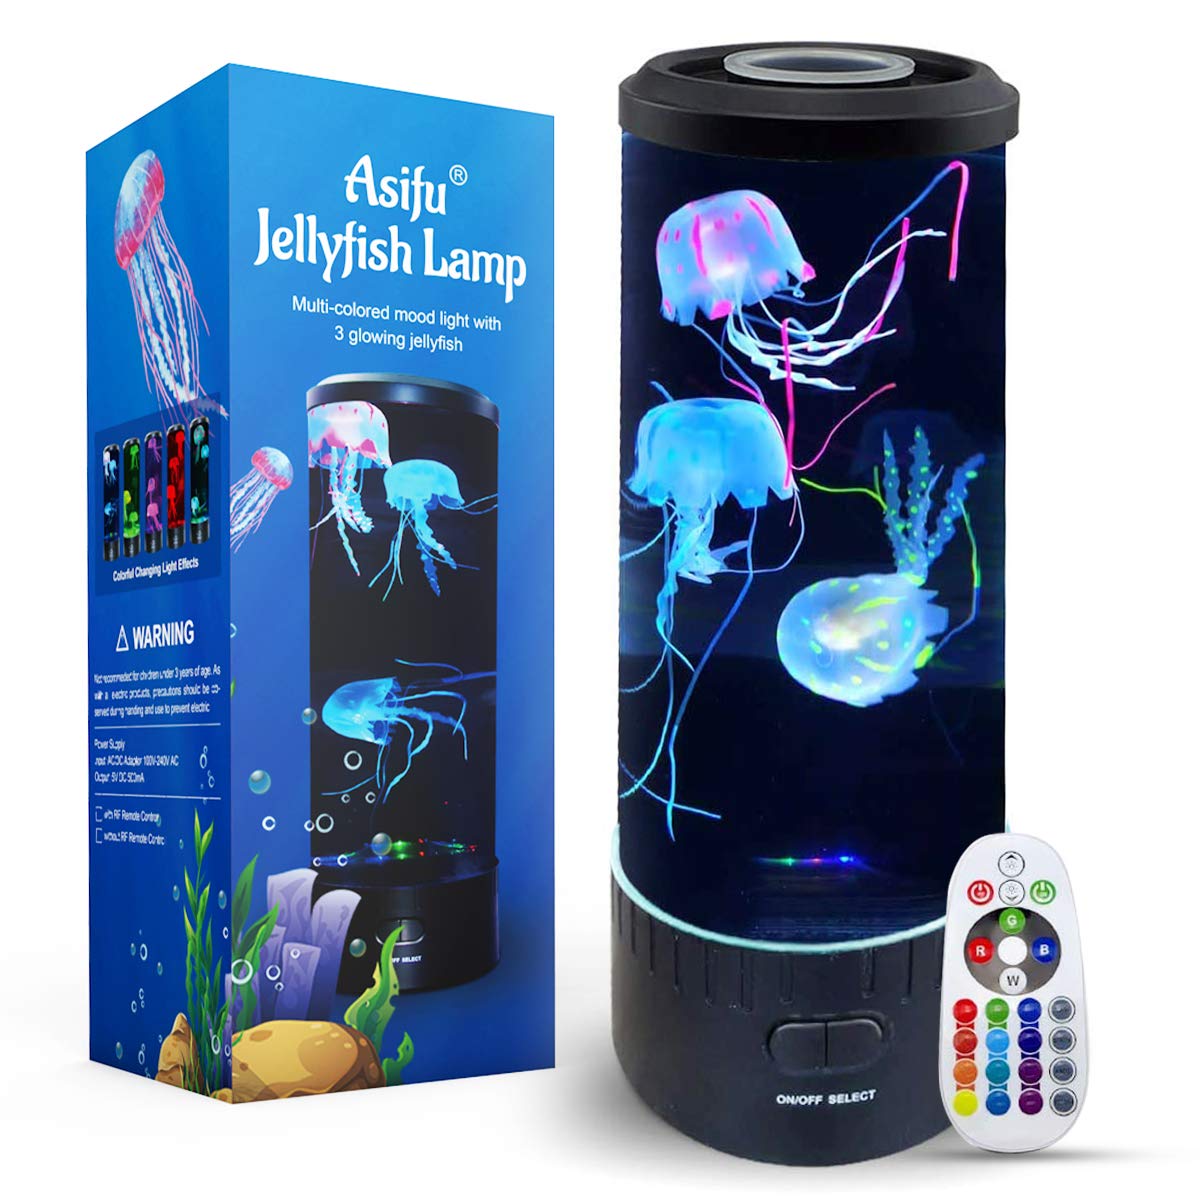 How To Set Up Jellyfish Lamp